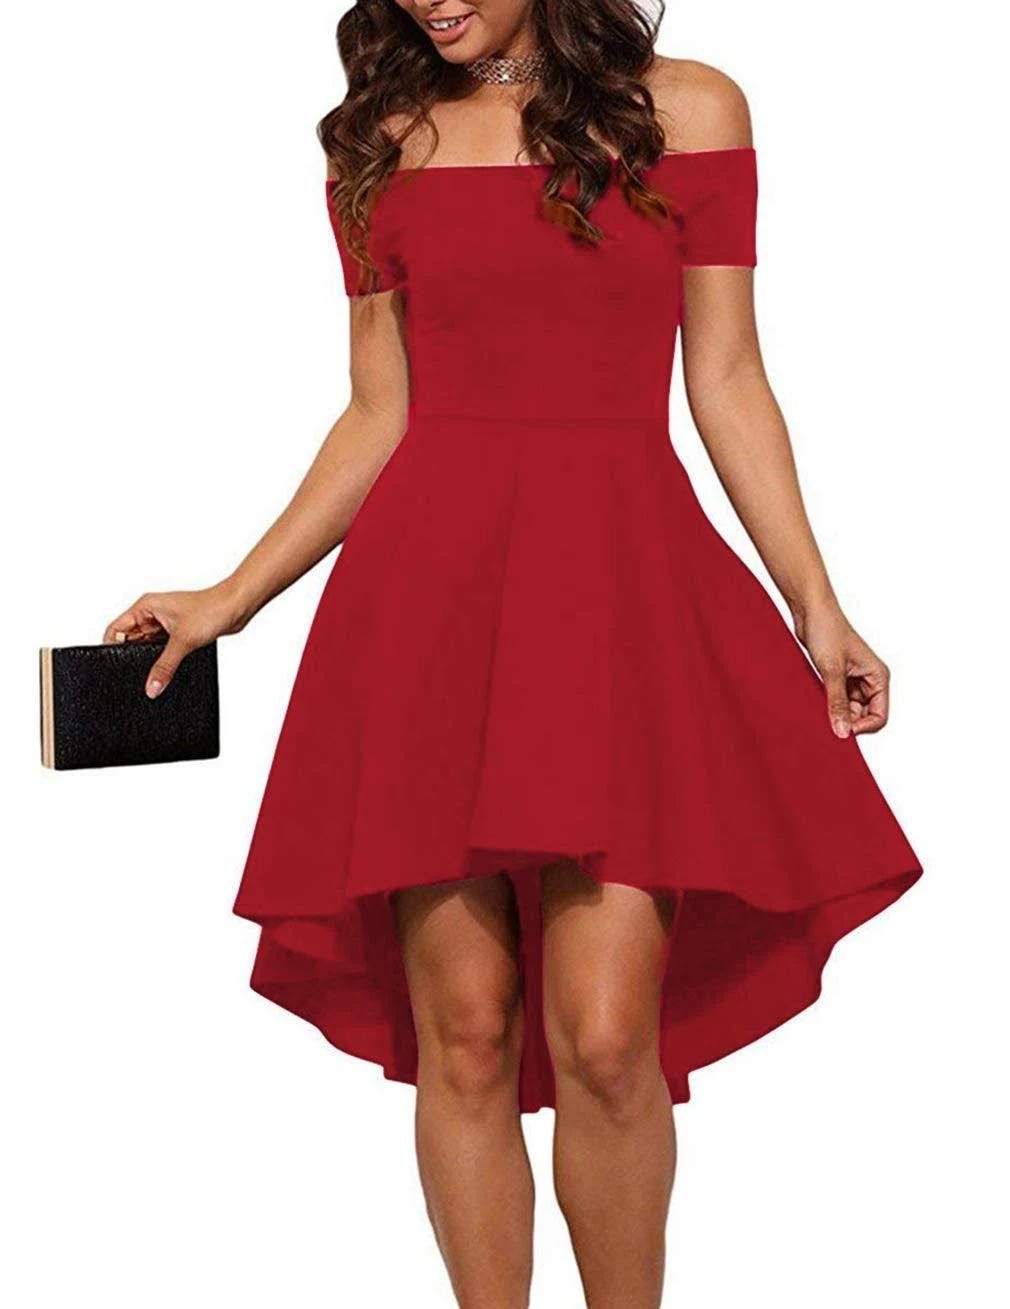 Stylish, off-shoulder cocktail dress for special occasions | Image